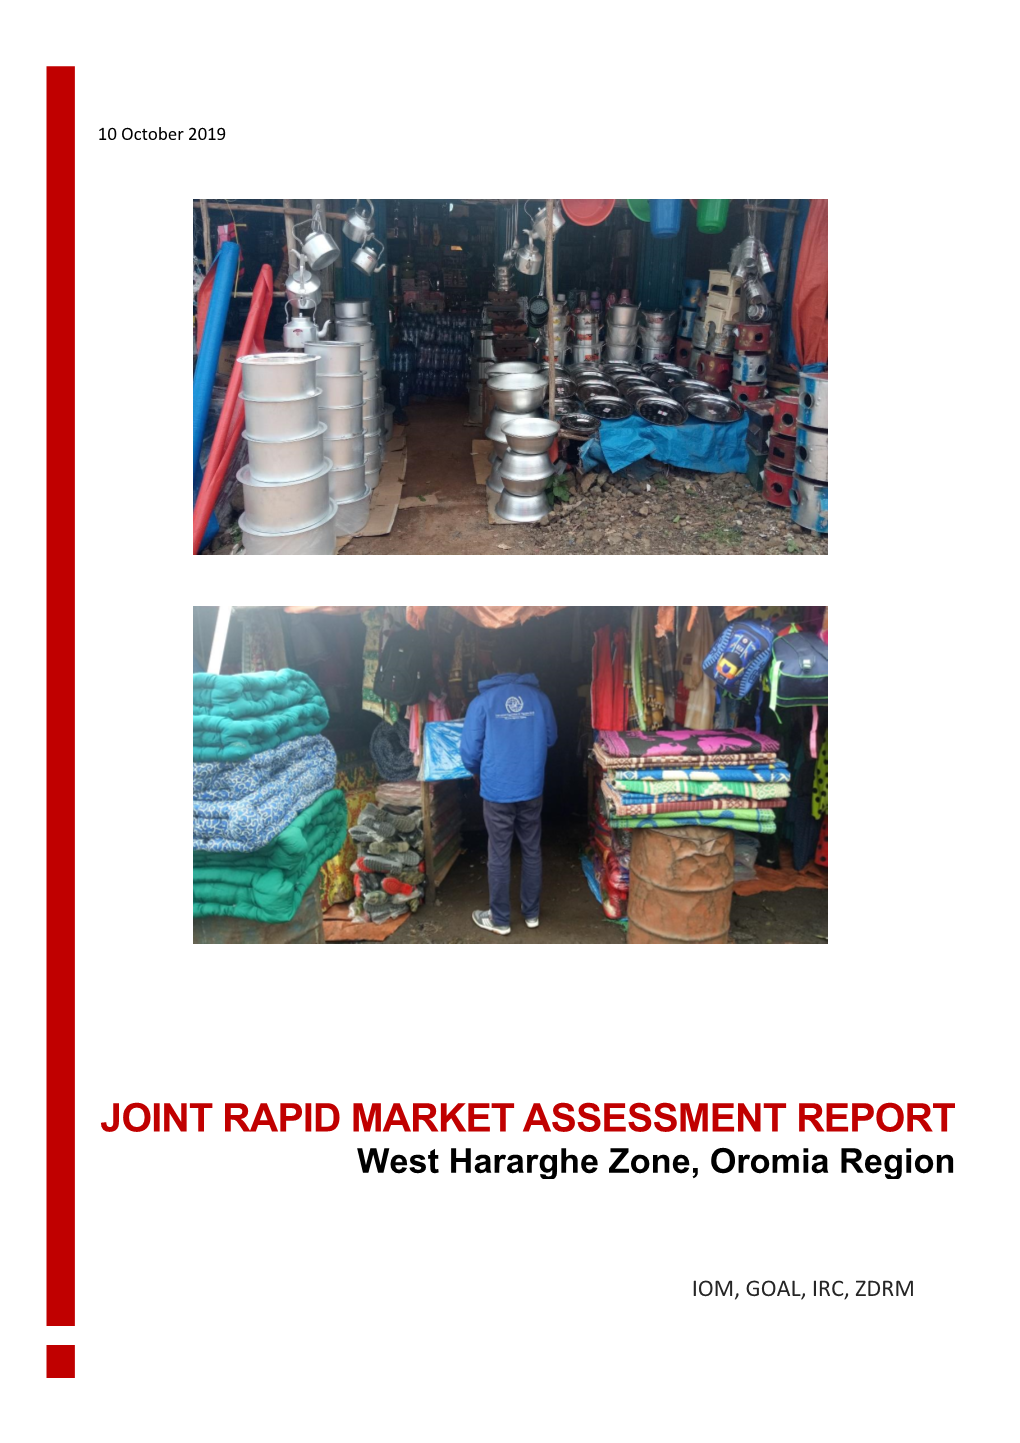 JOINT RAPID MARKET ASSESSMENT REPORT West Hararghe Zone, Oromia Region